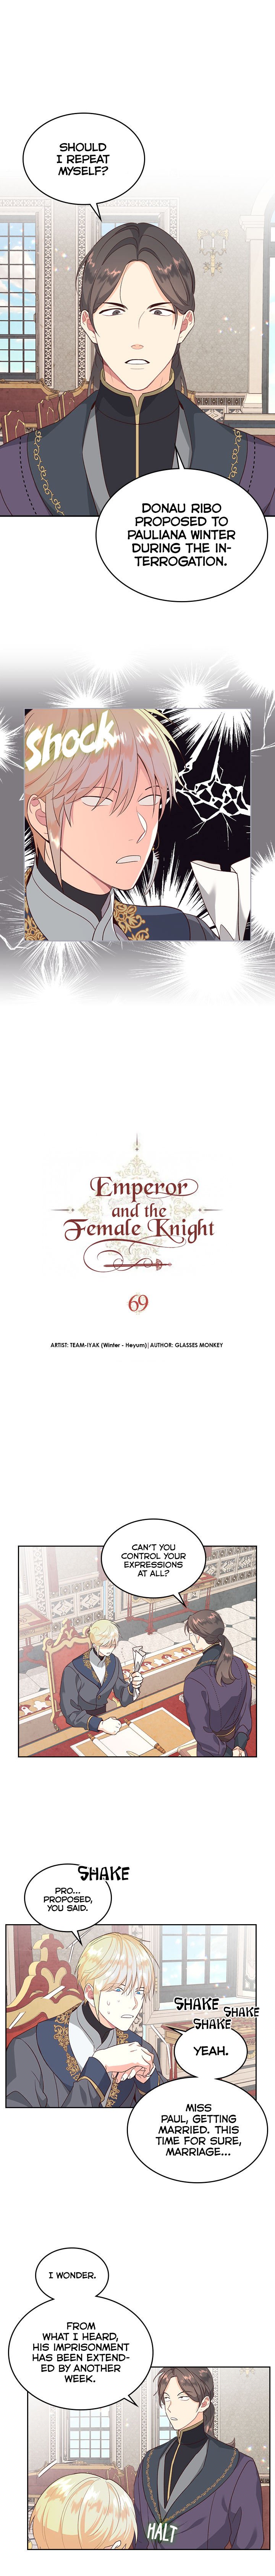 emperor-and-the-female-knight-chap-69-1